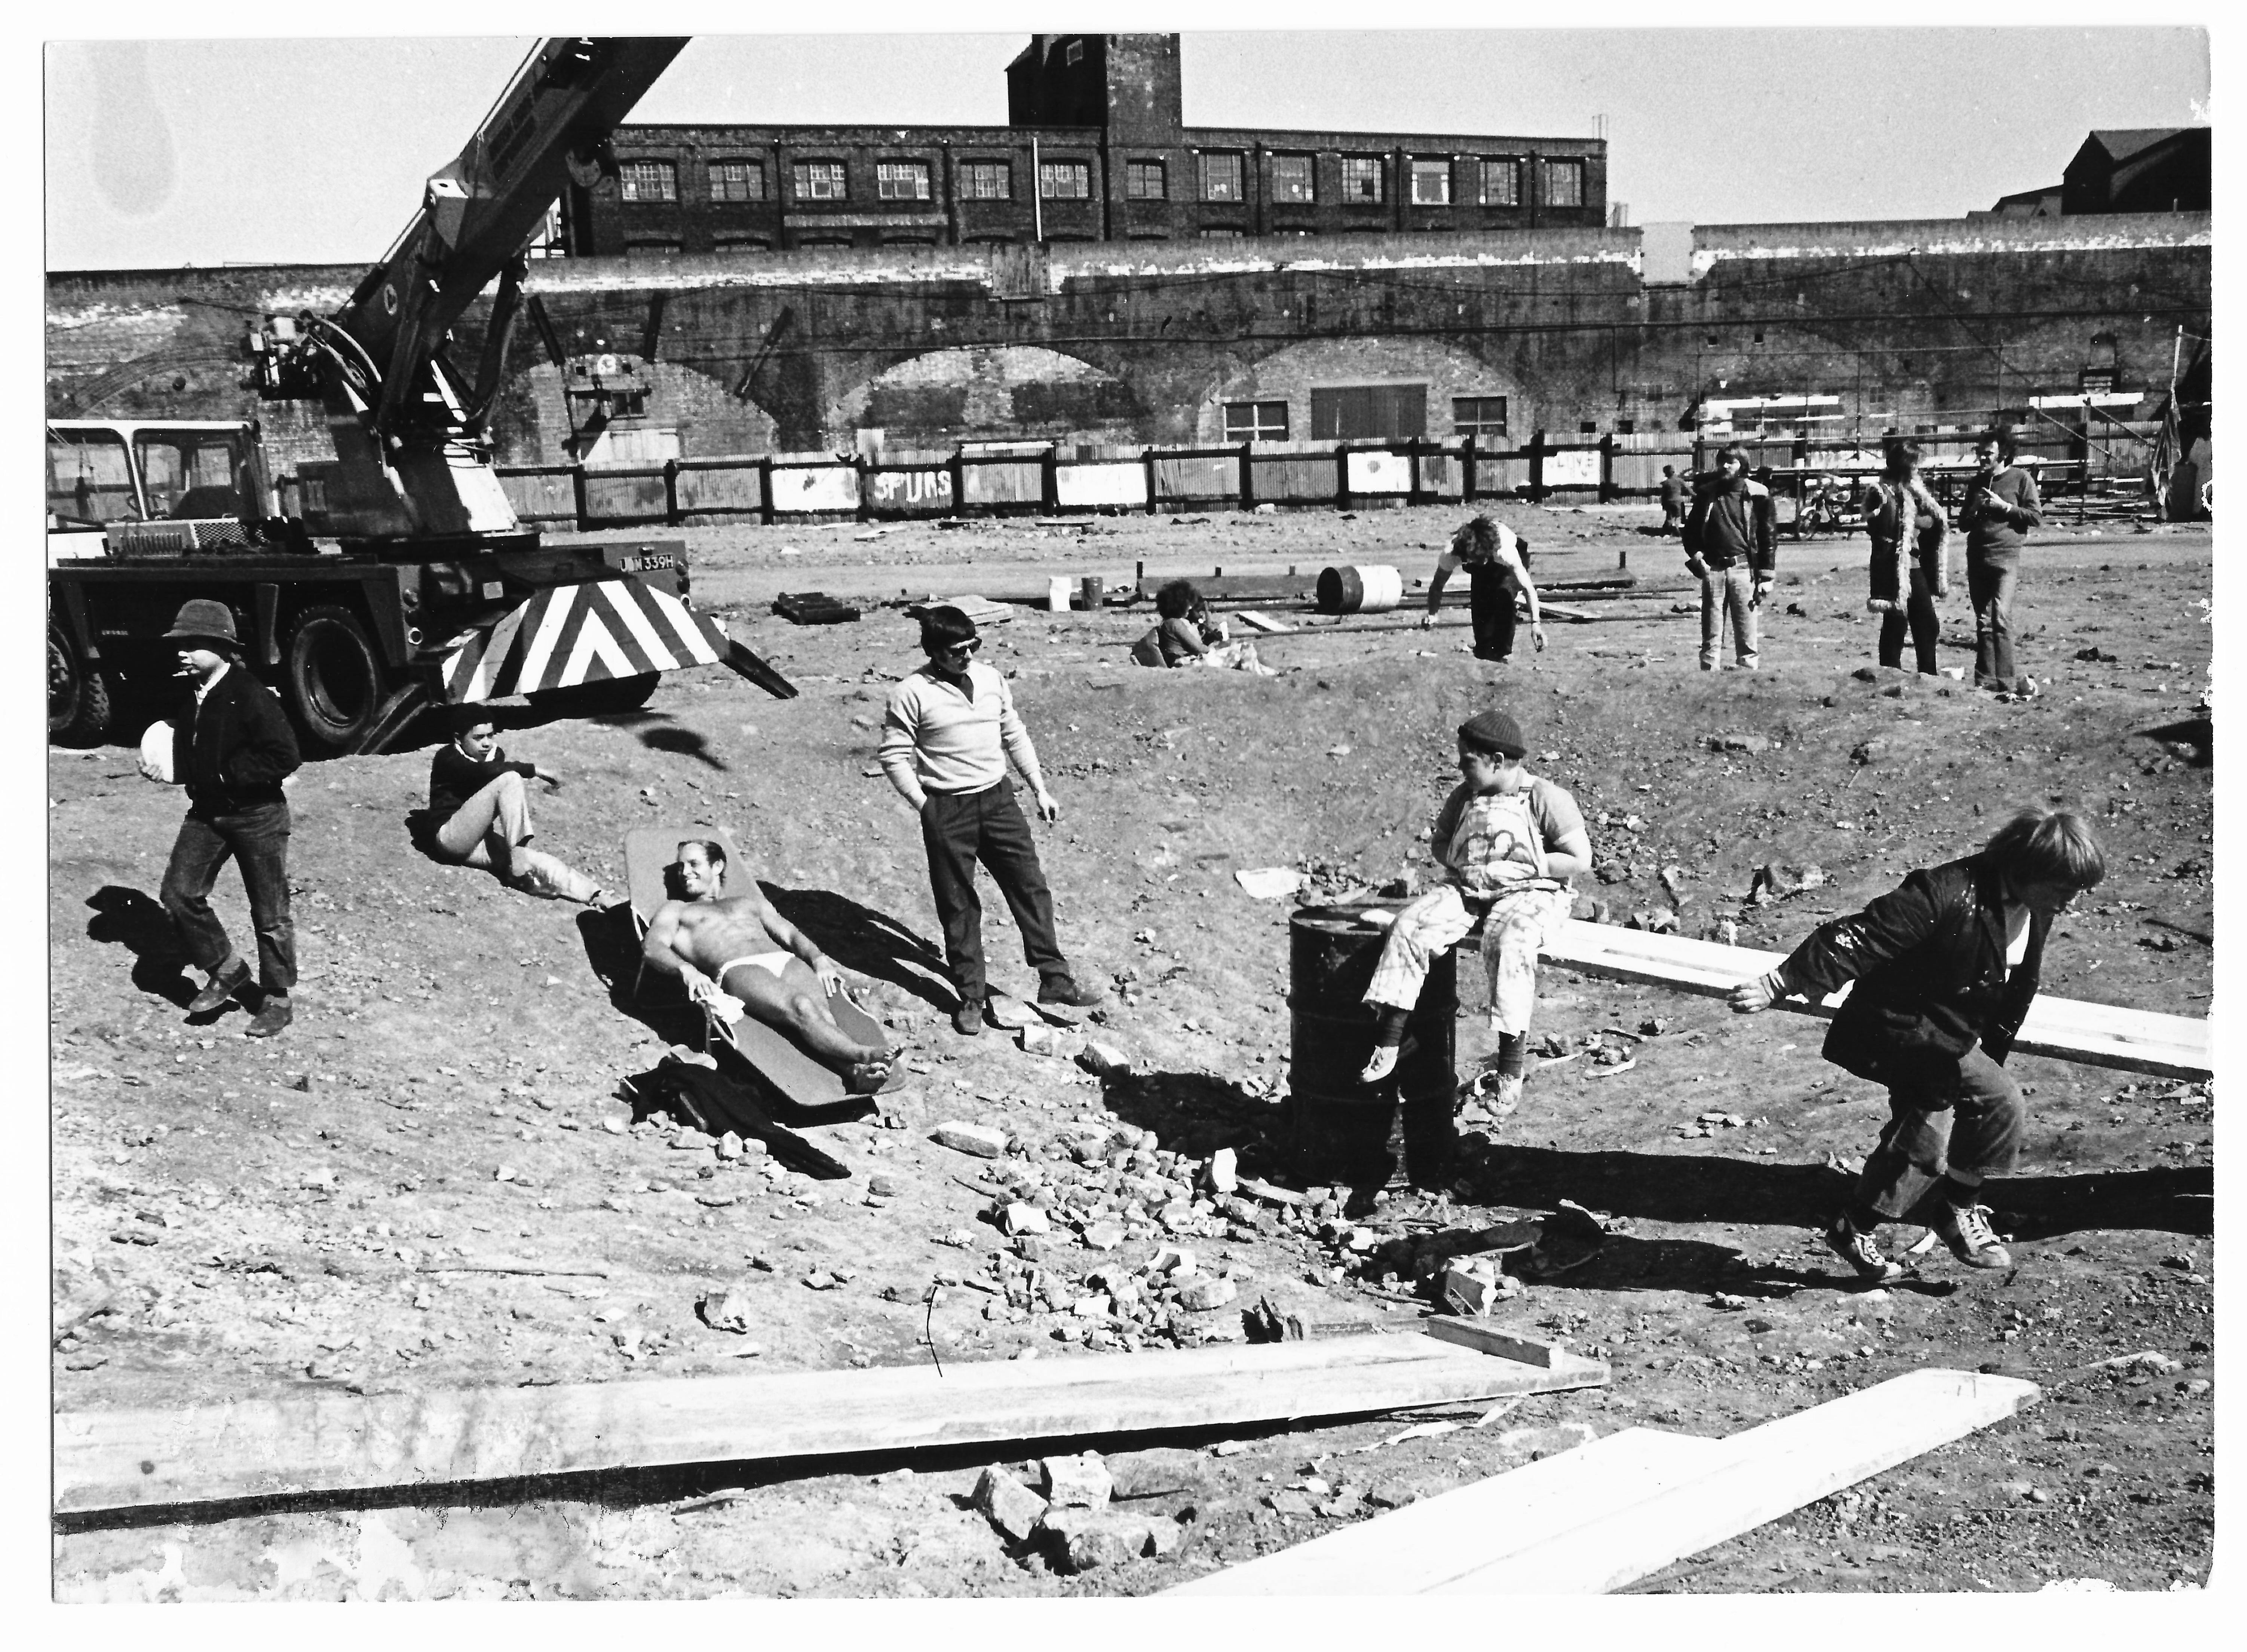 The image shows a black-and-white photograph taken during the performance or rehearsal of Leopoldo Maler’s Crane Ballet. On an unpaved construction site where a circular pit has been dug, several boys run around or sit on a plank of wood, which is propped up against an oil drum near the center of the image. To the left, a smiling man in a white speedo sunbathes on a recliner. Behind him, the front portion of a mobile crane is visible in the background, its arm extended upward out of the image’s frame.